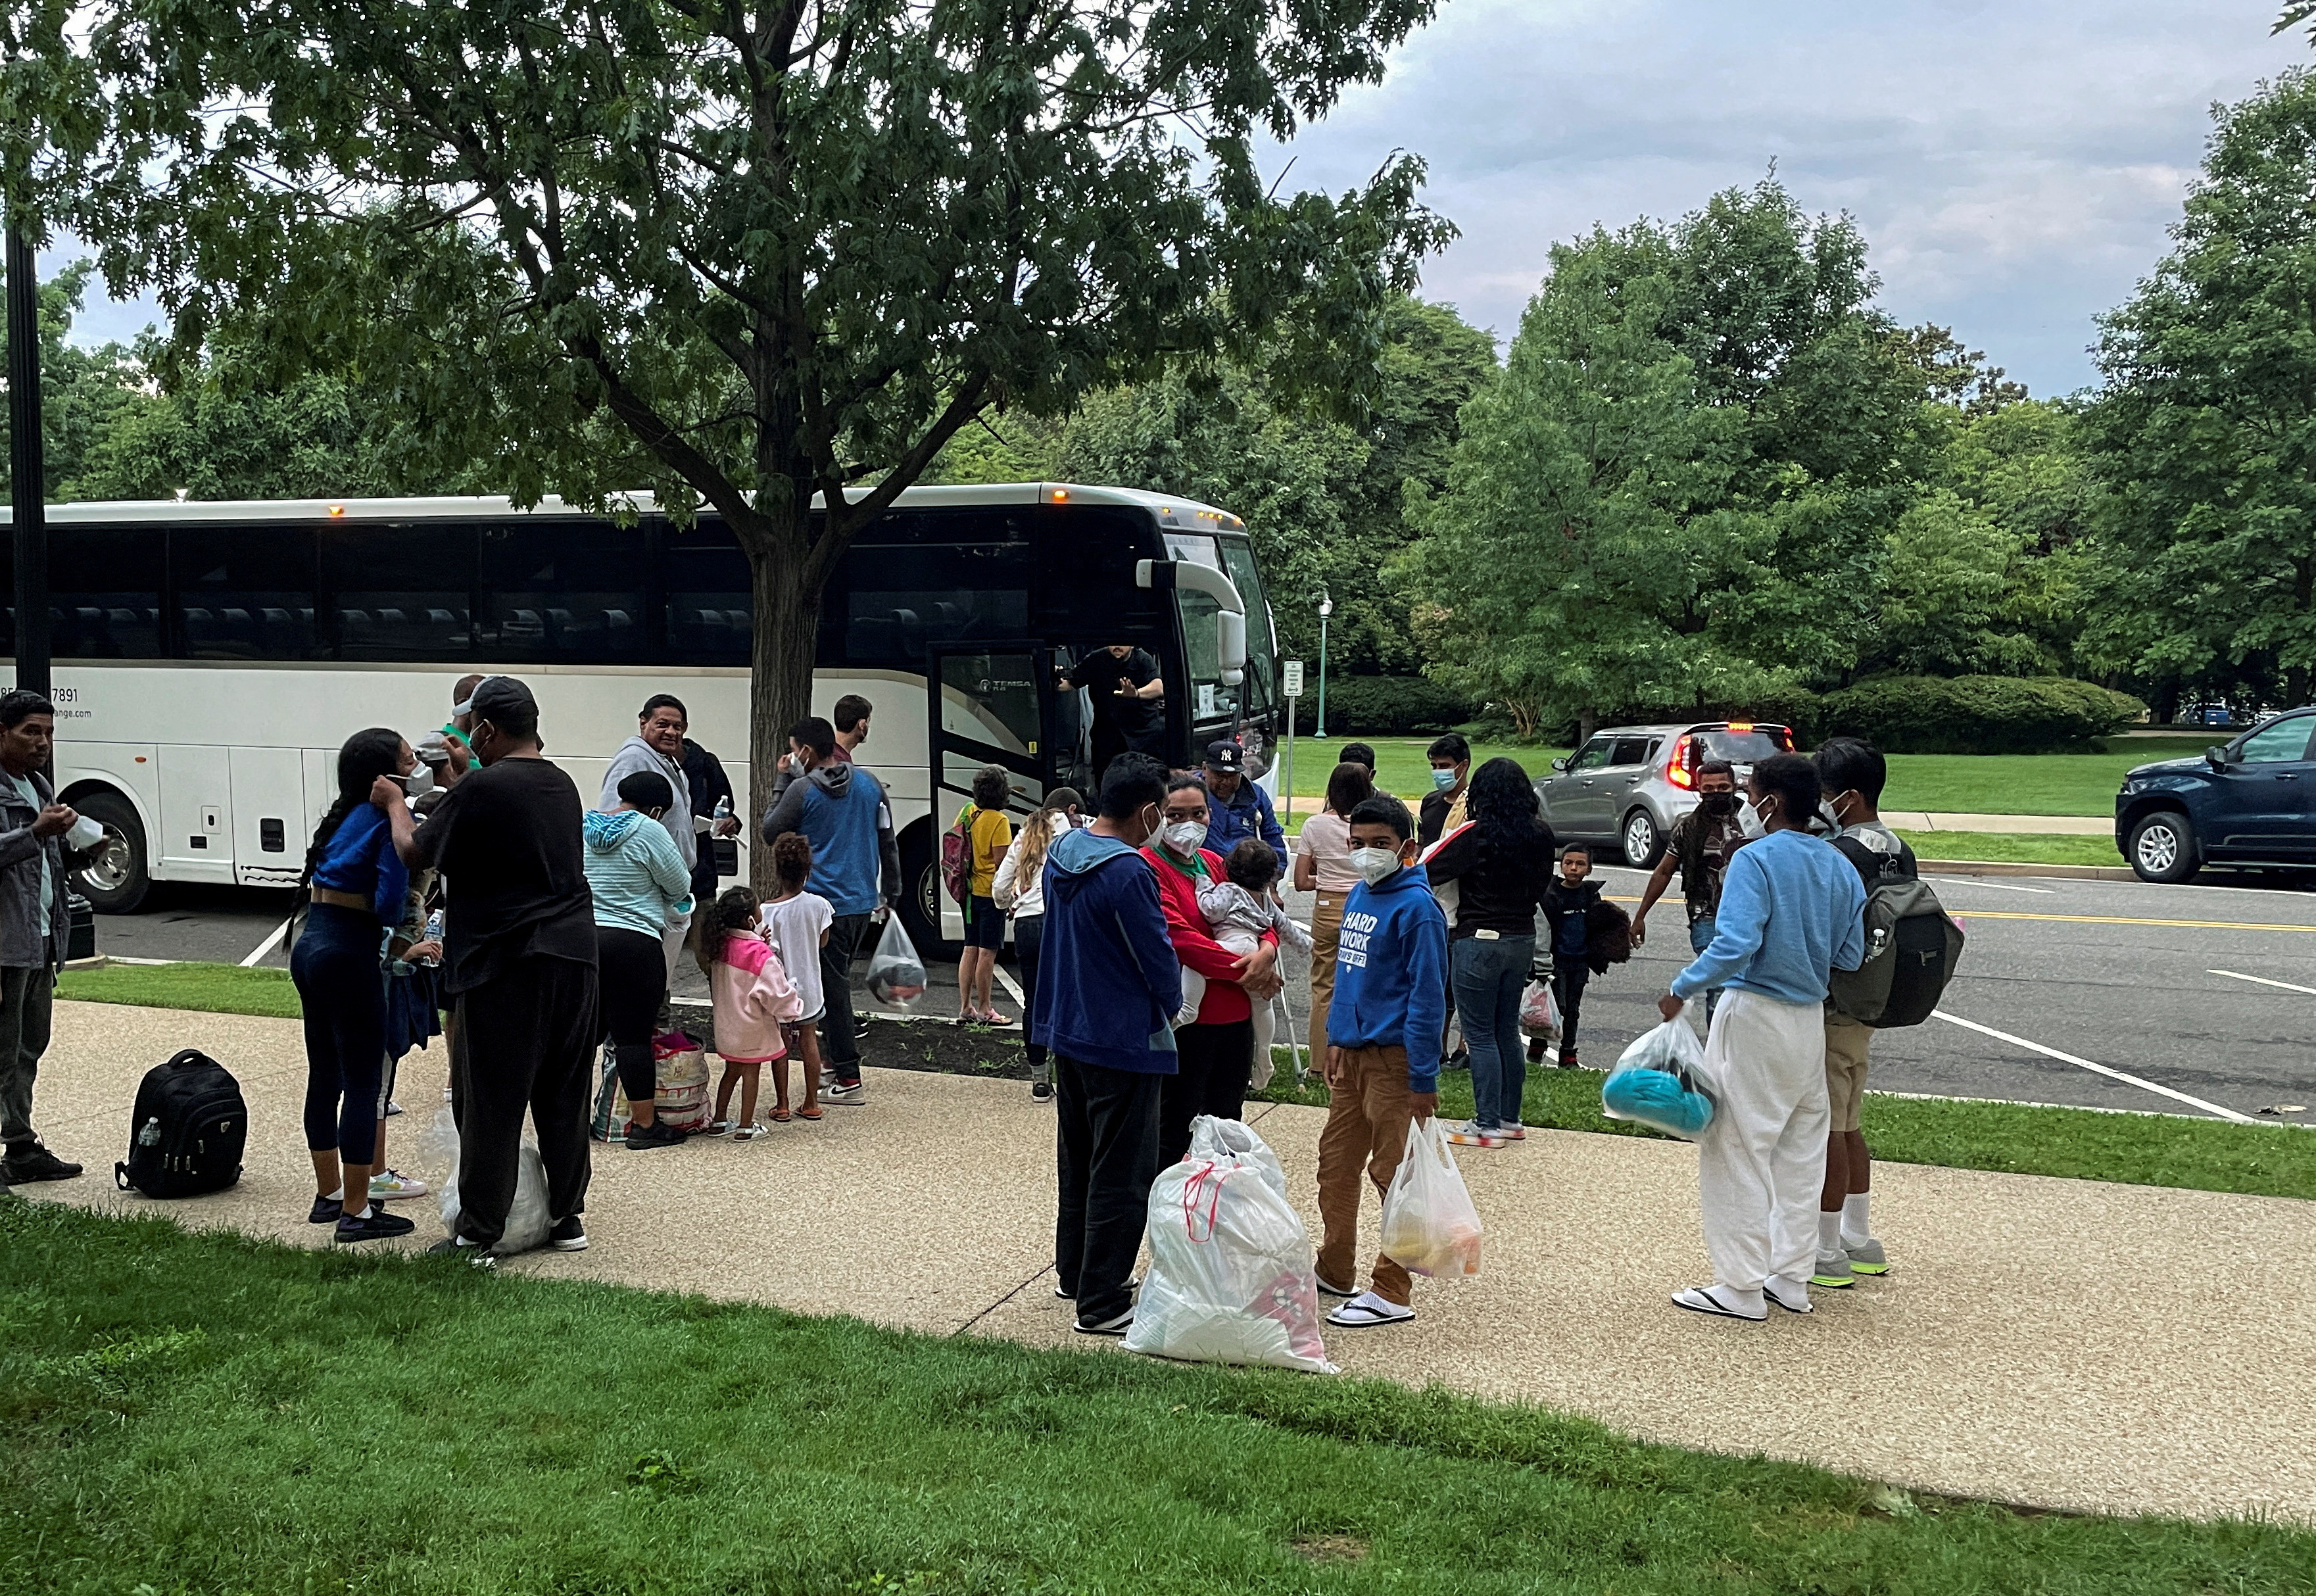 Migrants arrive at Union Station in Washington